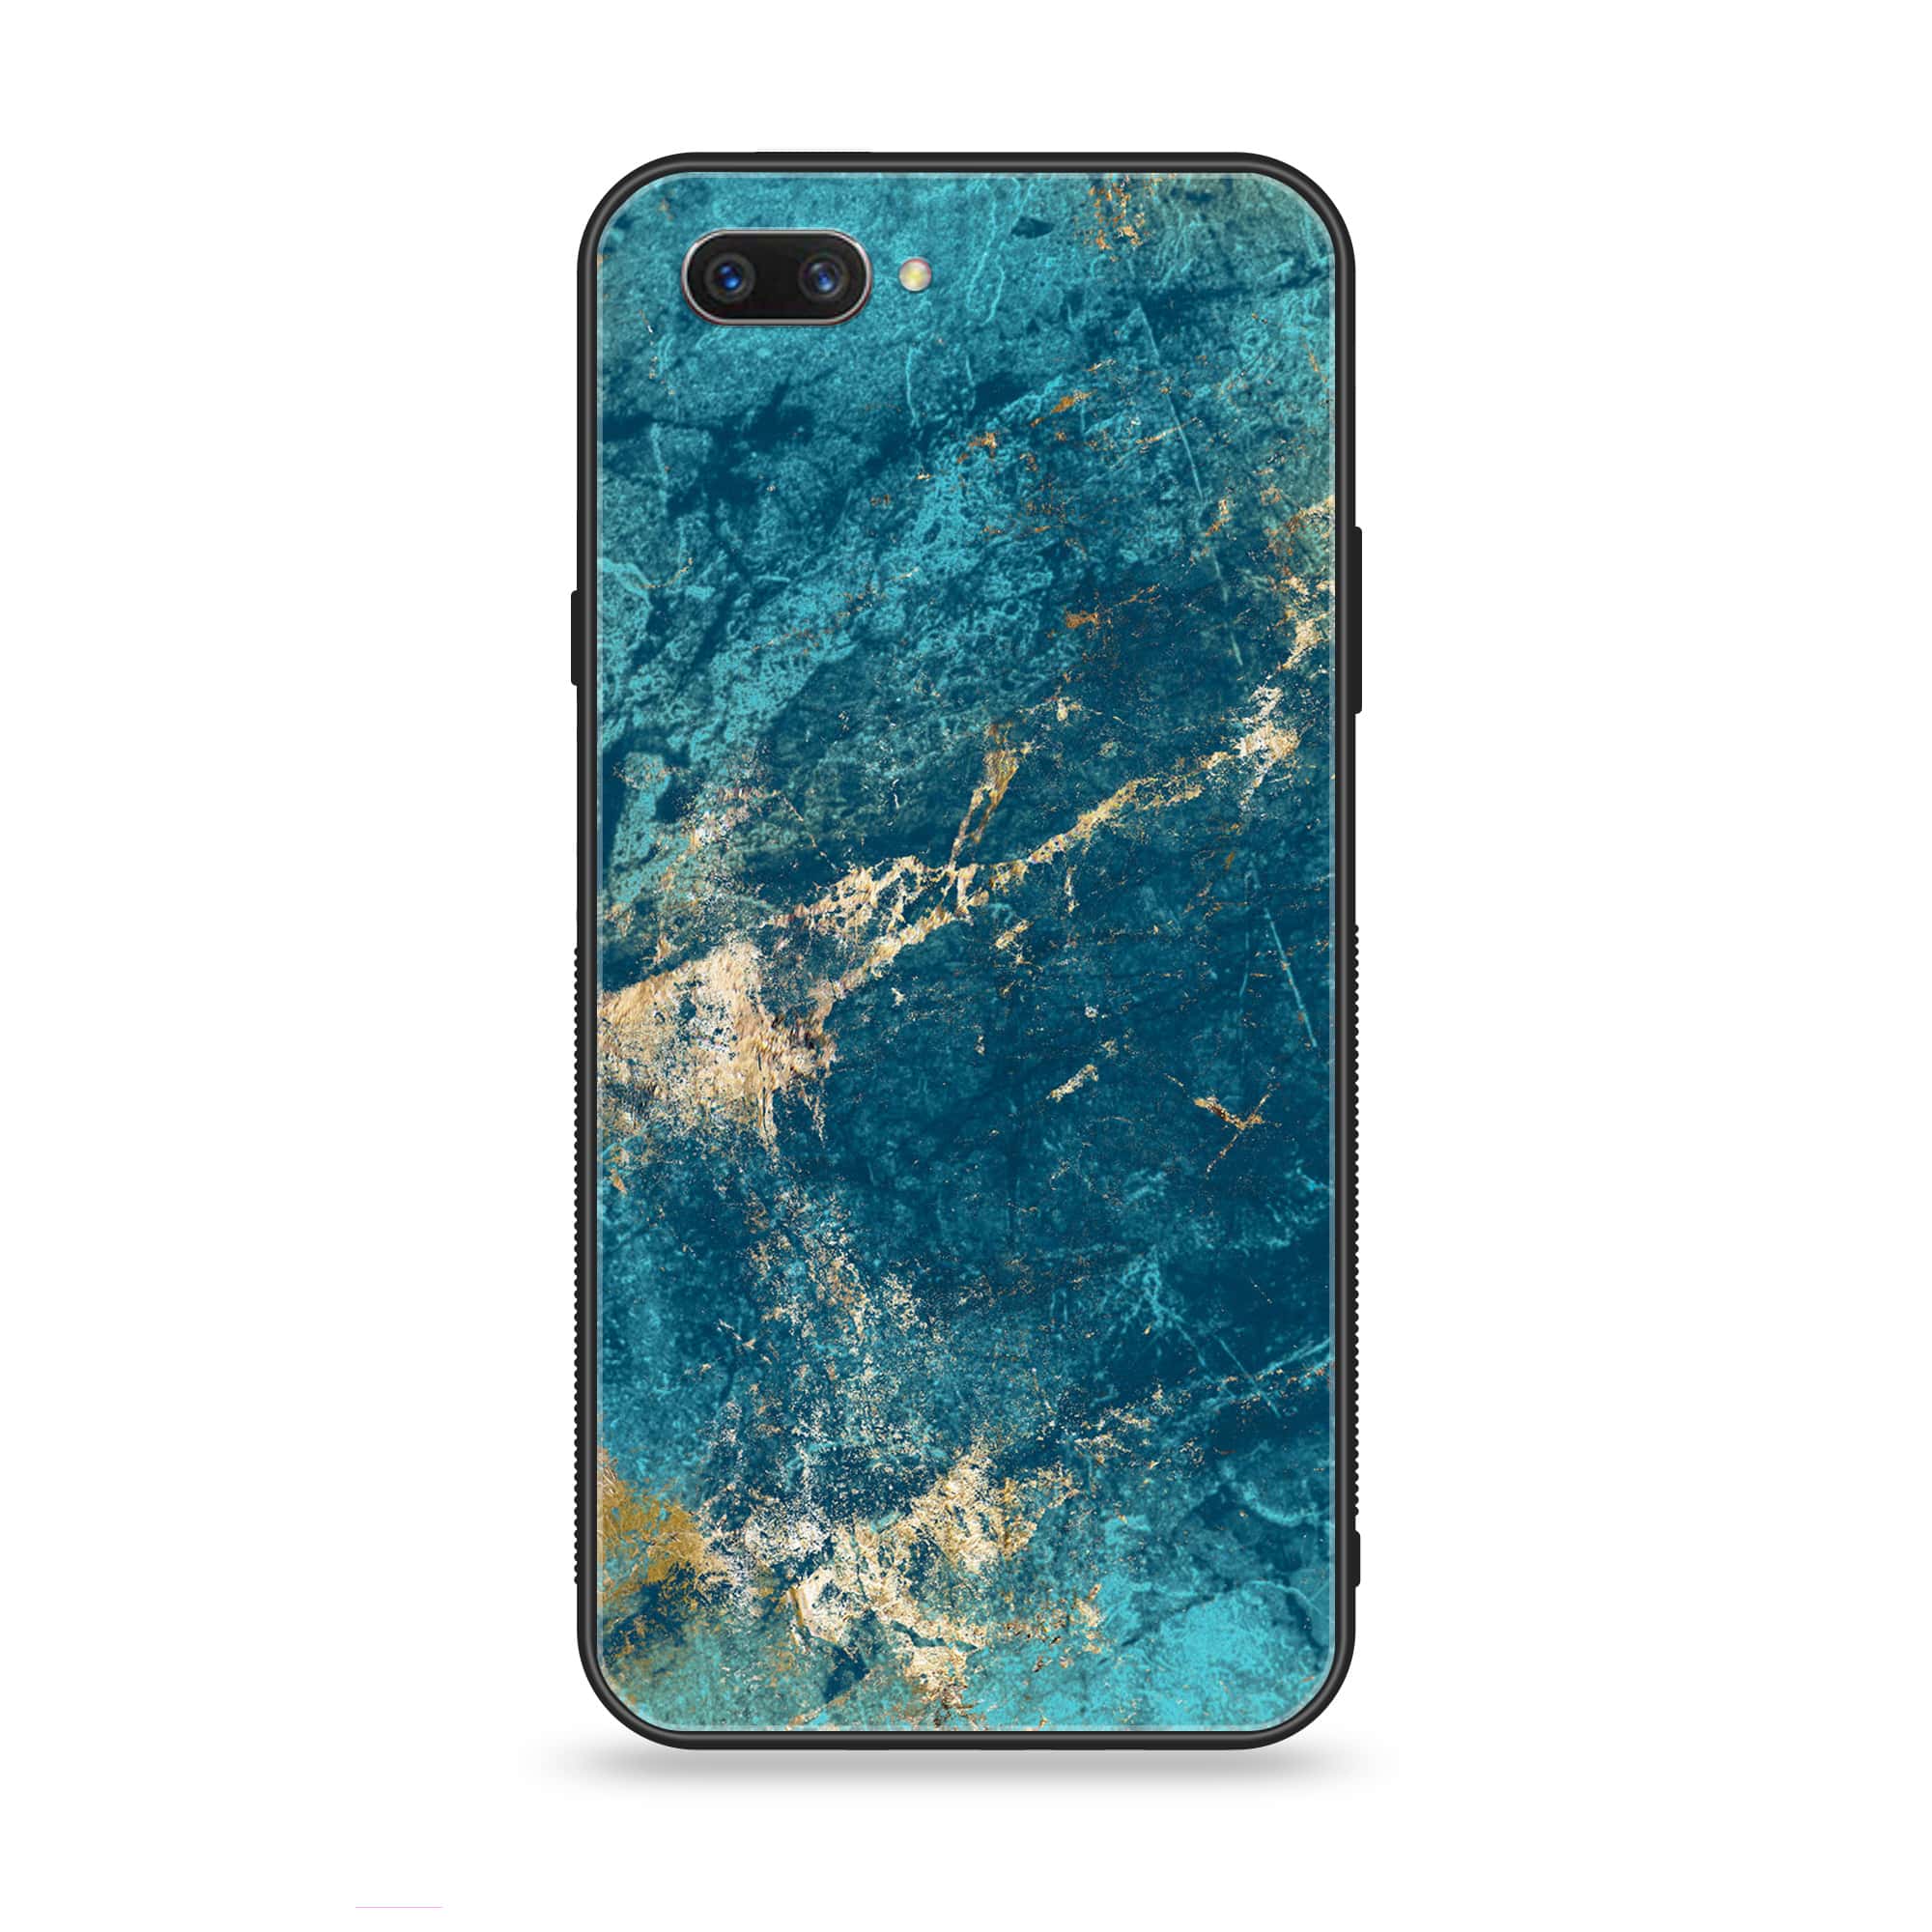 Oppo A3s - Blue Marble 2.0 Series - Premium Printed Glass soft Bumper shock Proof Case